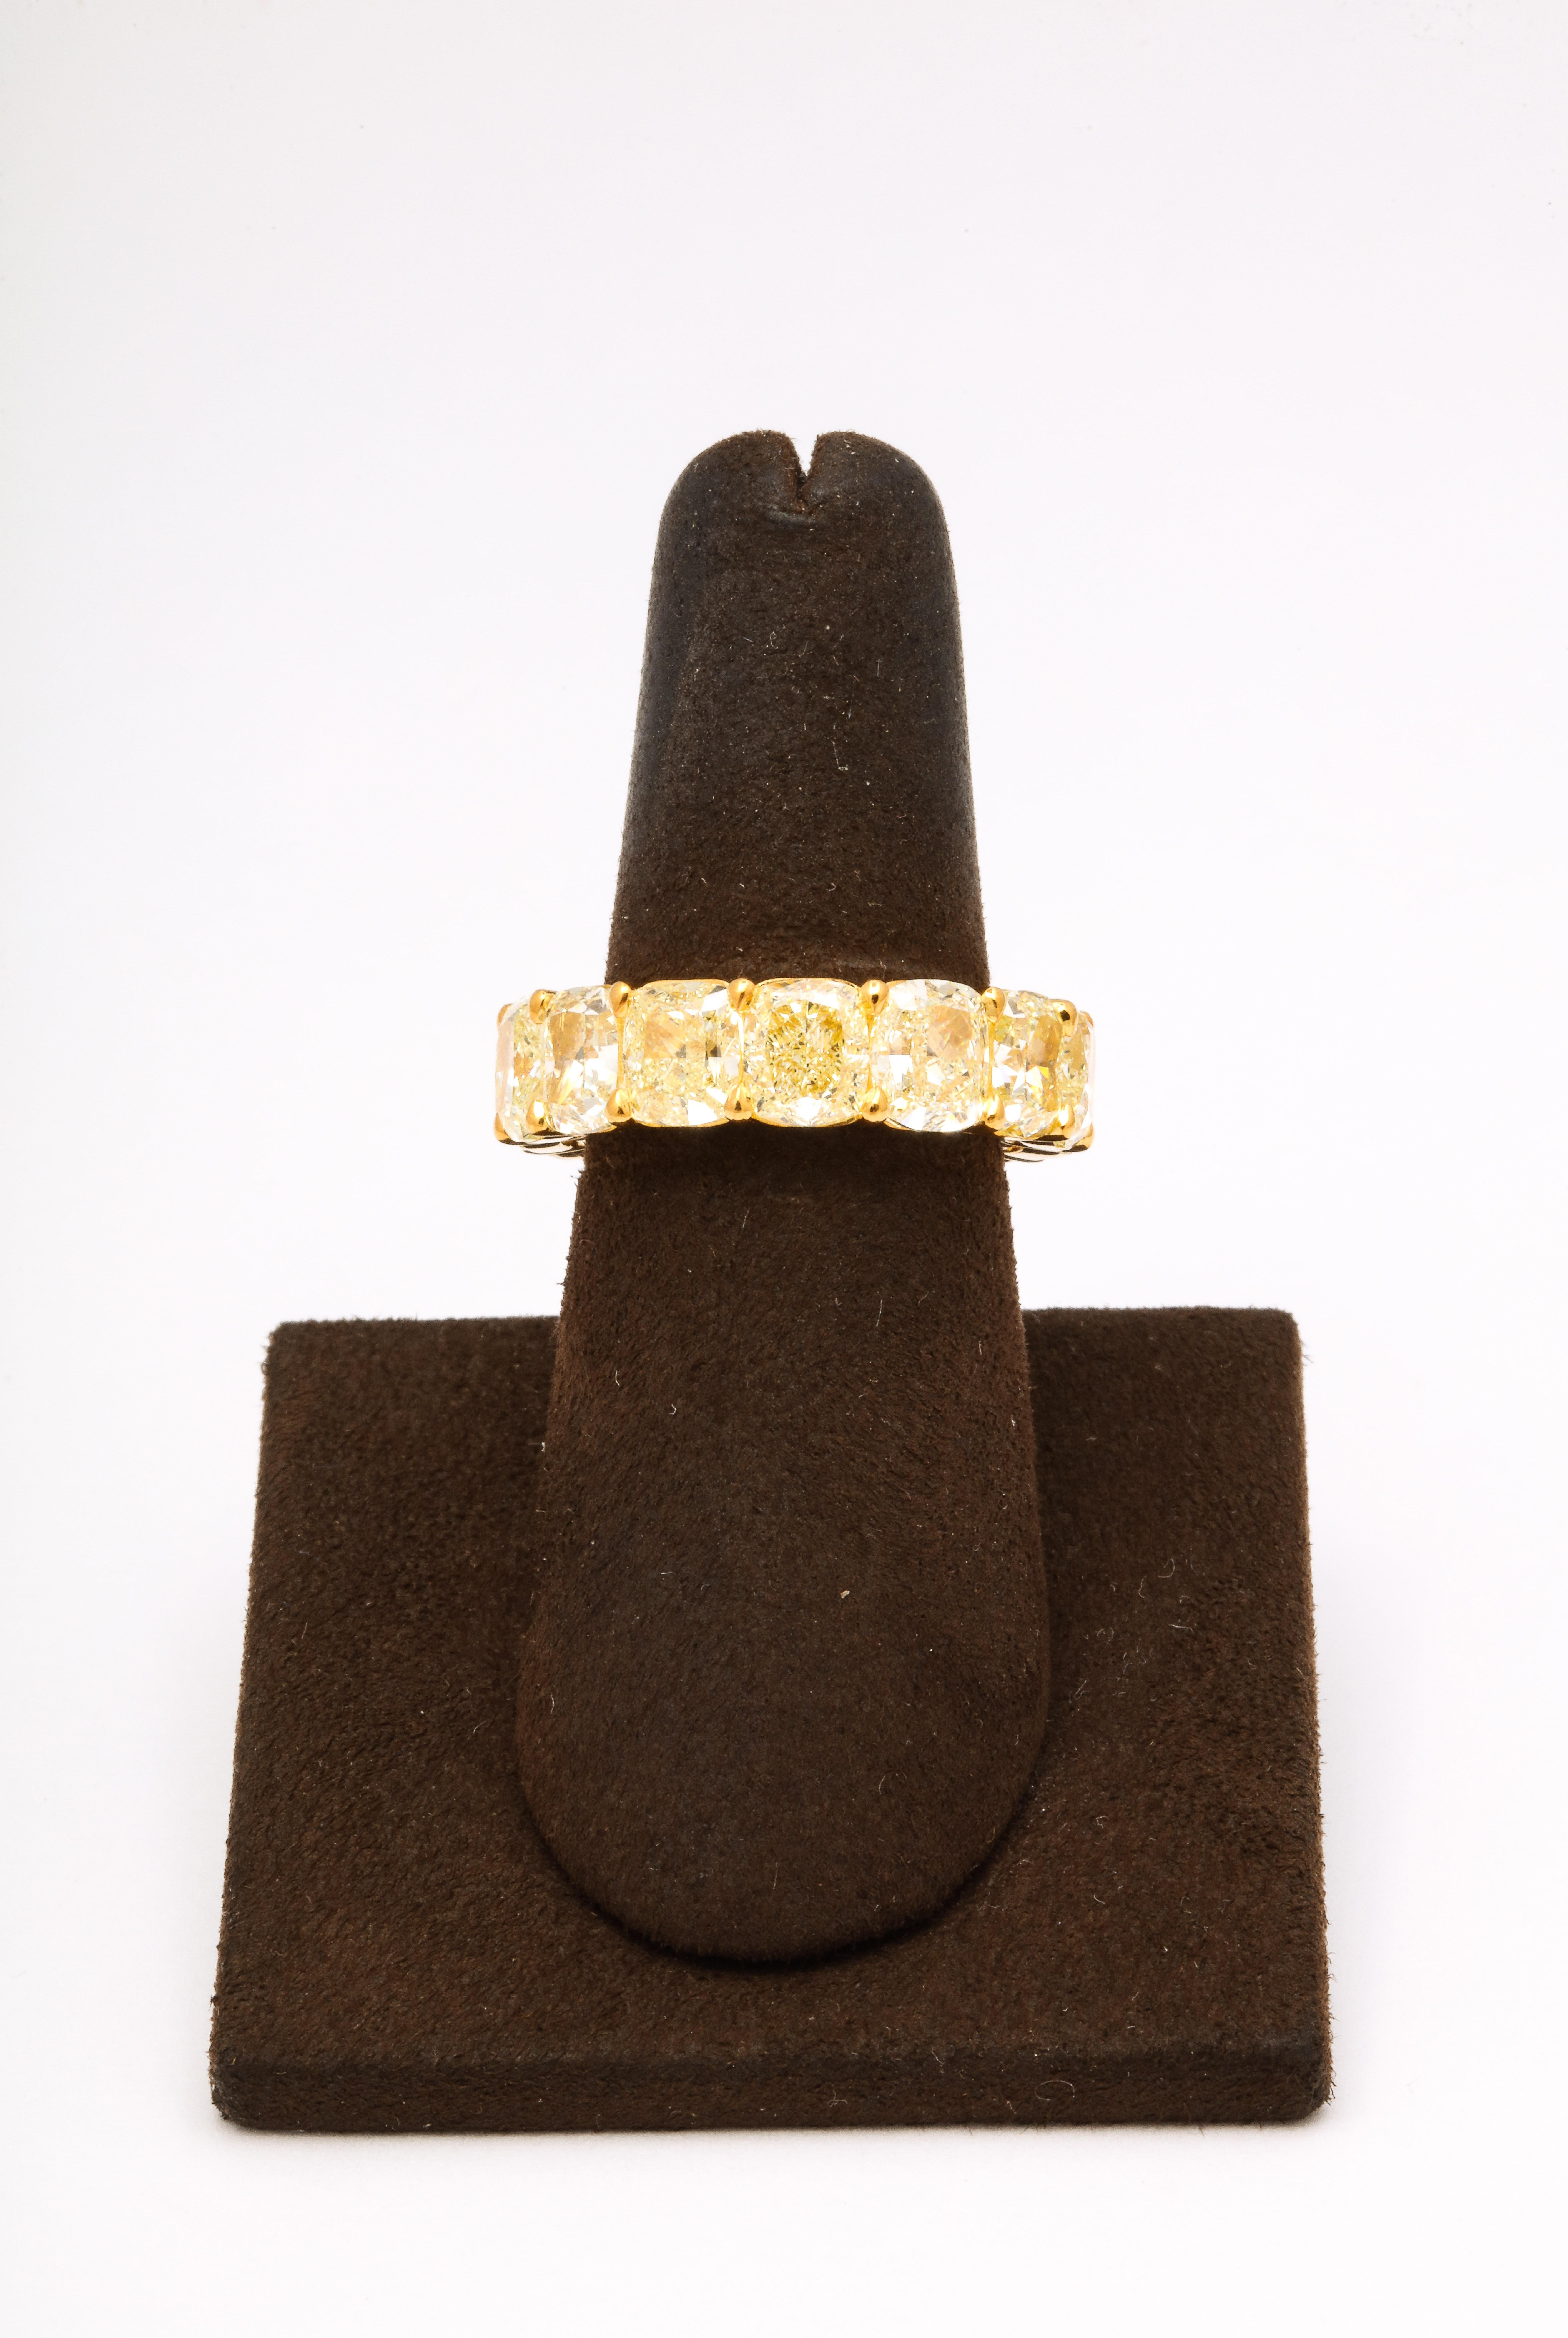 
An important Fancy Yellow Diamond Eternity Band. 

14.52 carats of cushion cut VS+ clarity diamonds set in a custom made 18k yellow gold band. 14 total diamonds — each stone is over 1 carat! 

Size 6.5
